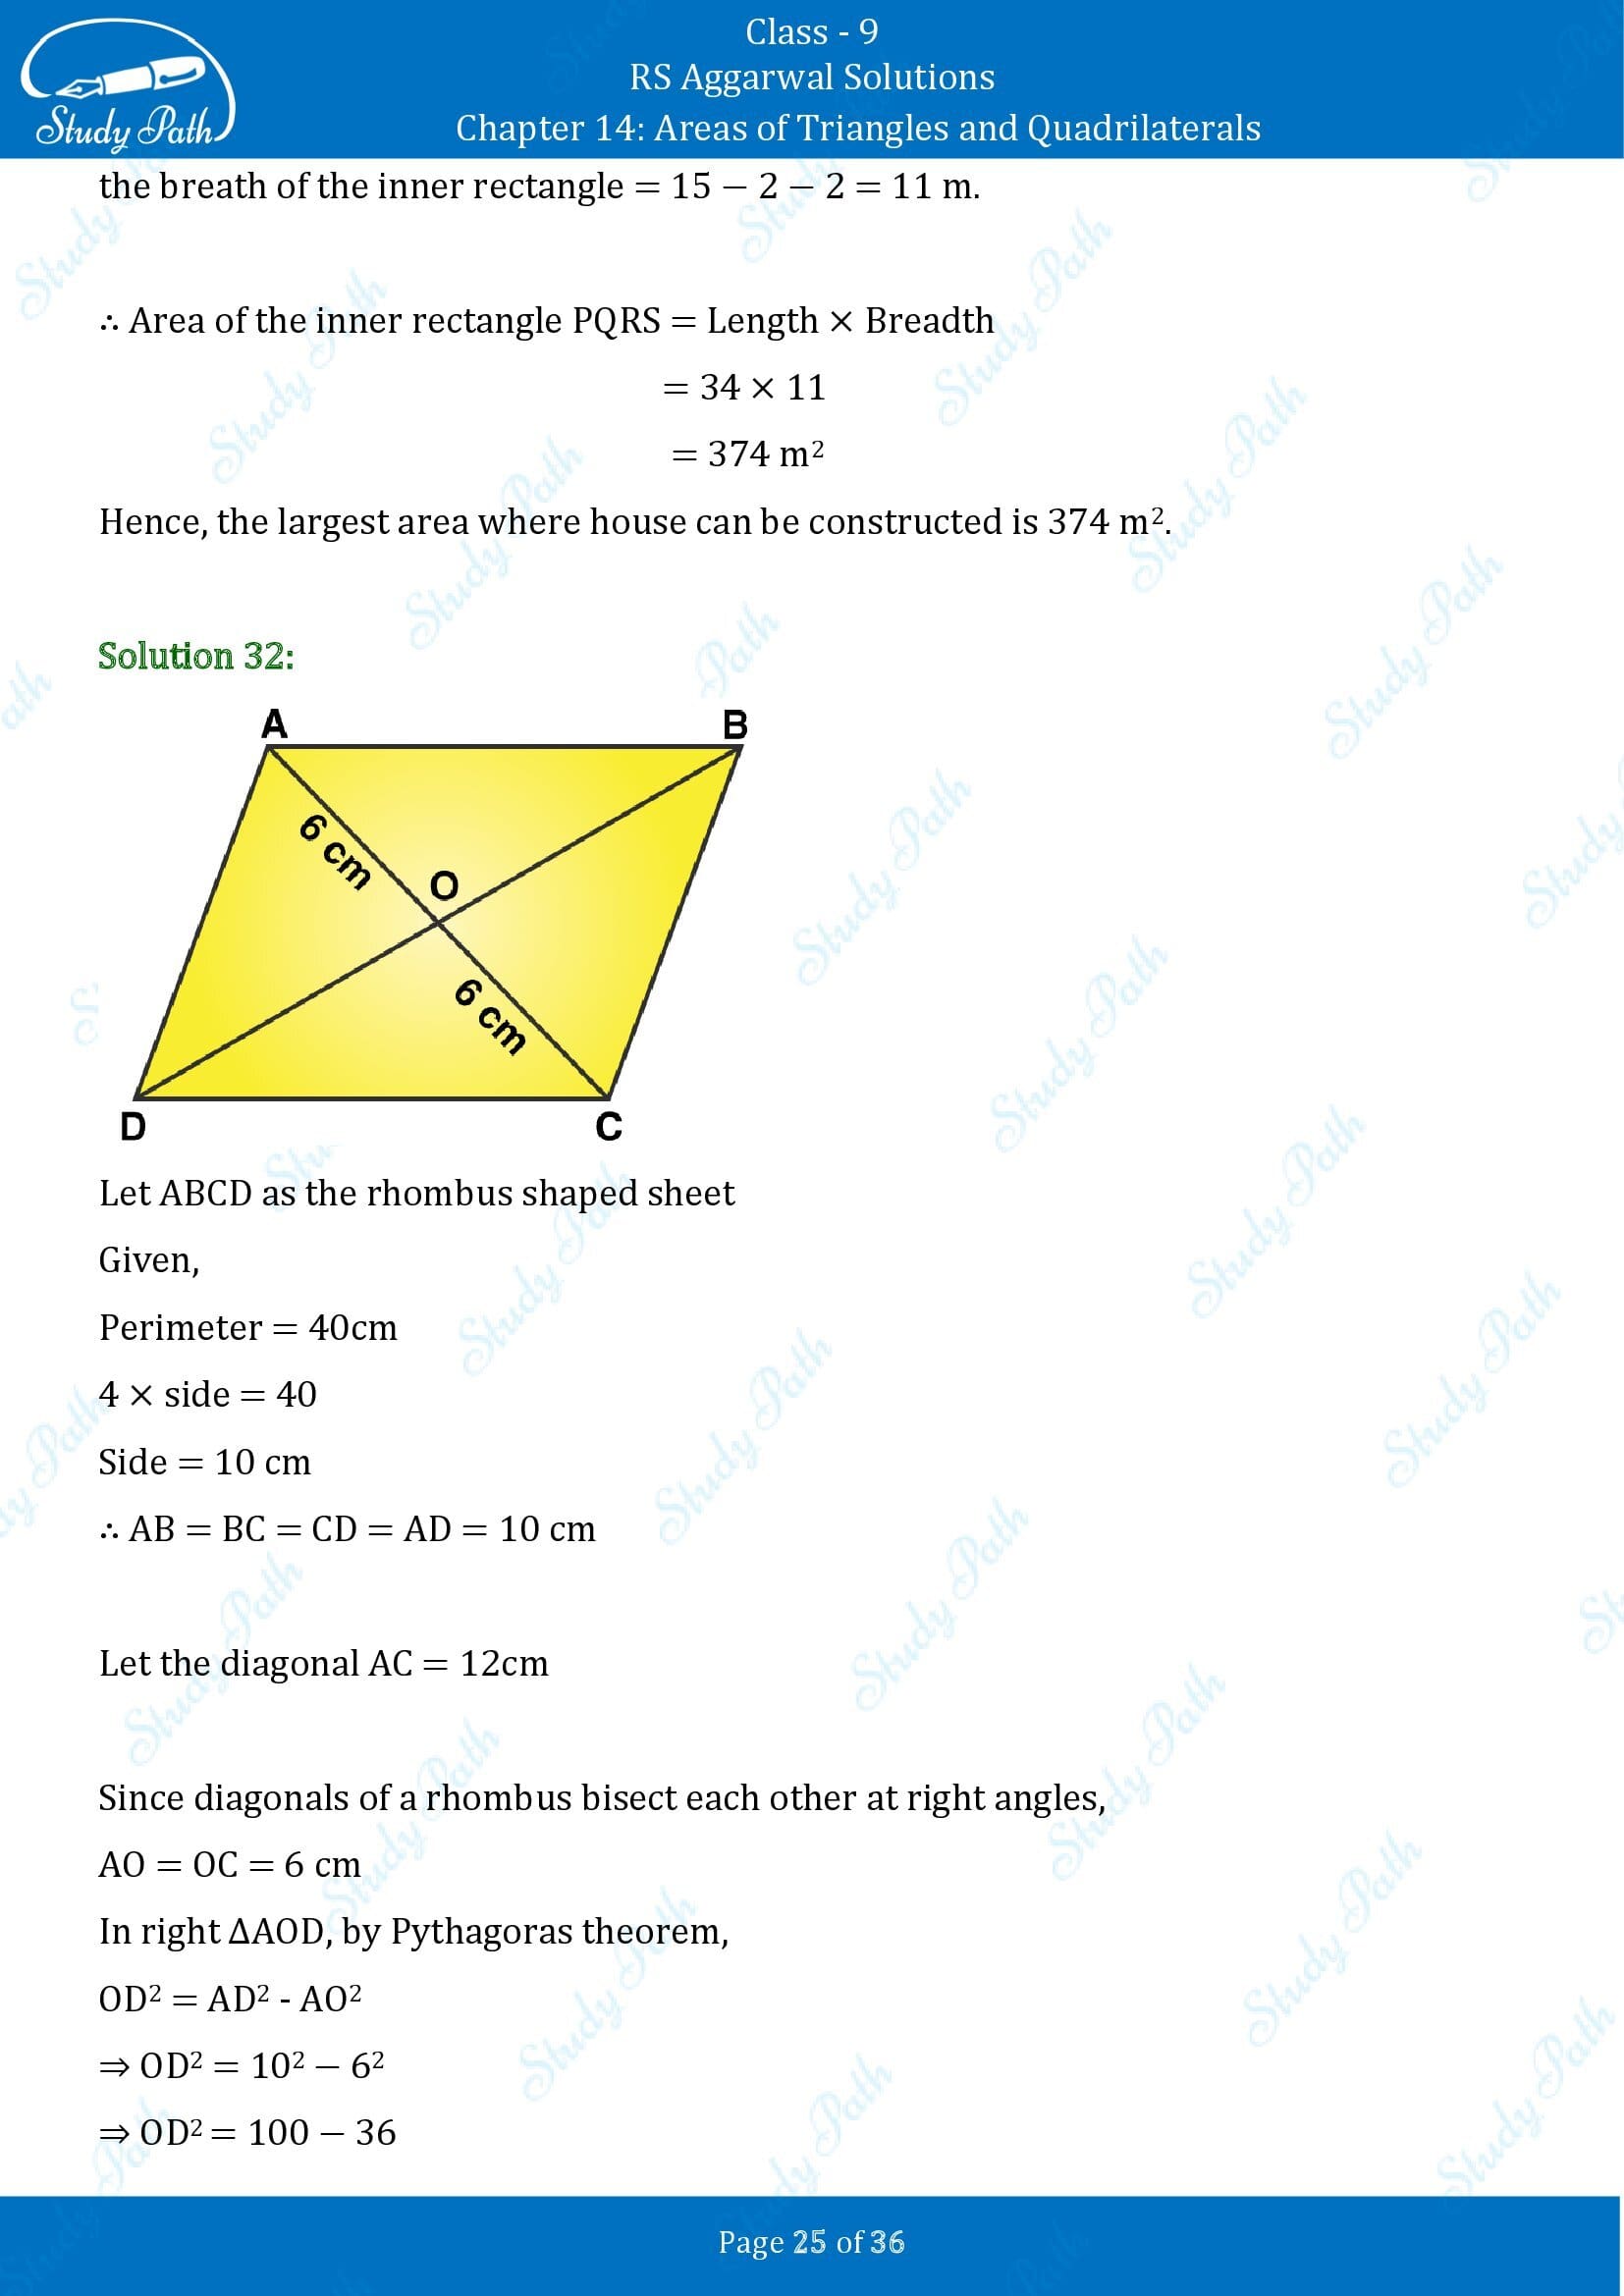 RS Aggarwal Solutions Class 9 Chapter 14 Areas of Triangles and Quadrilaterals Exercise 14 00025